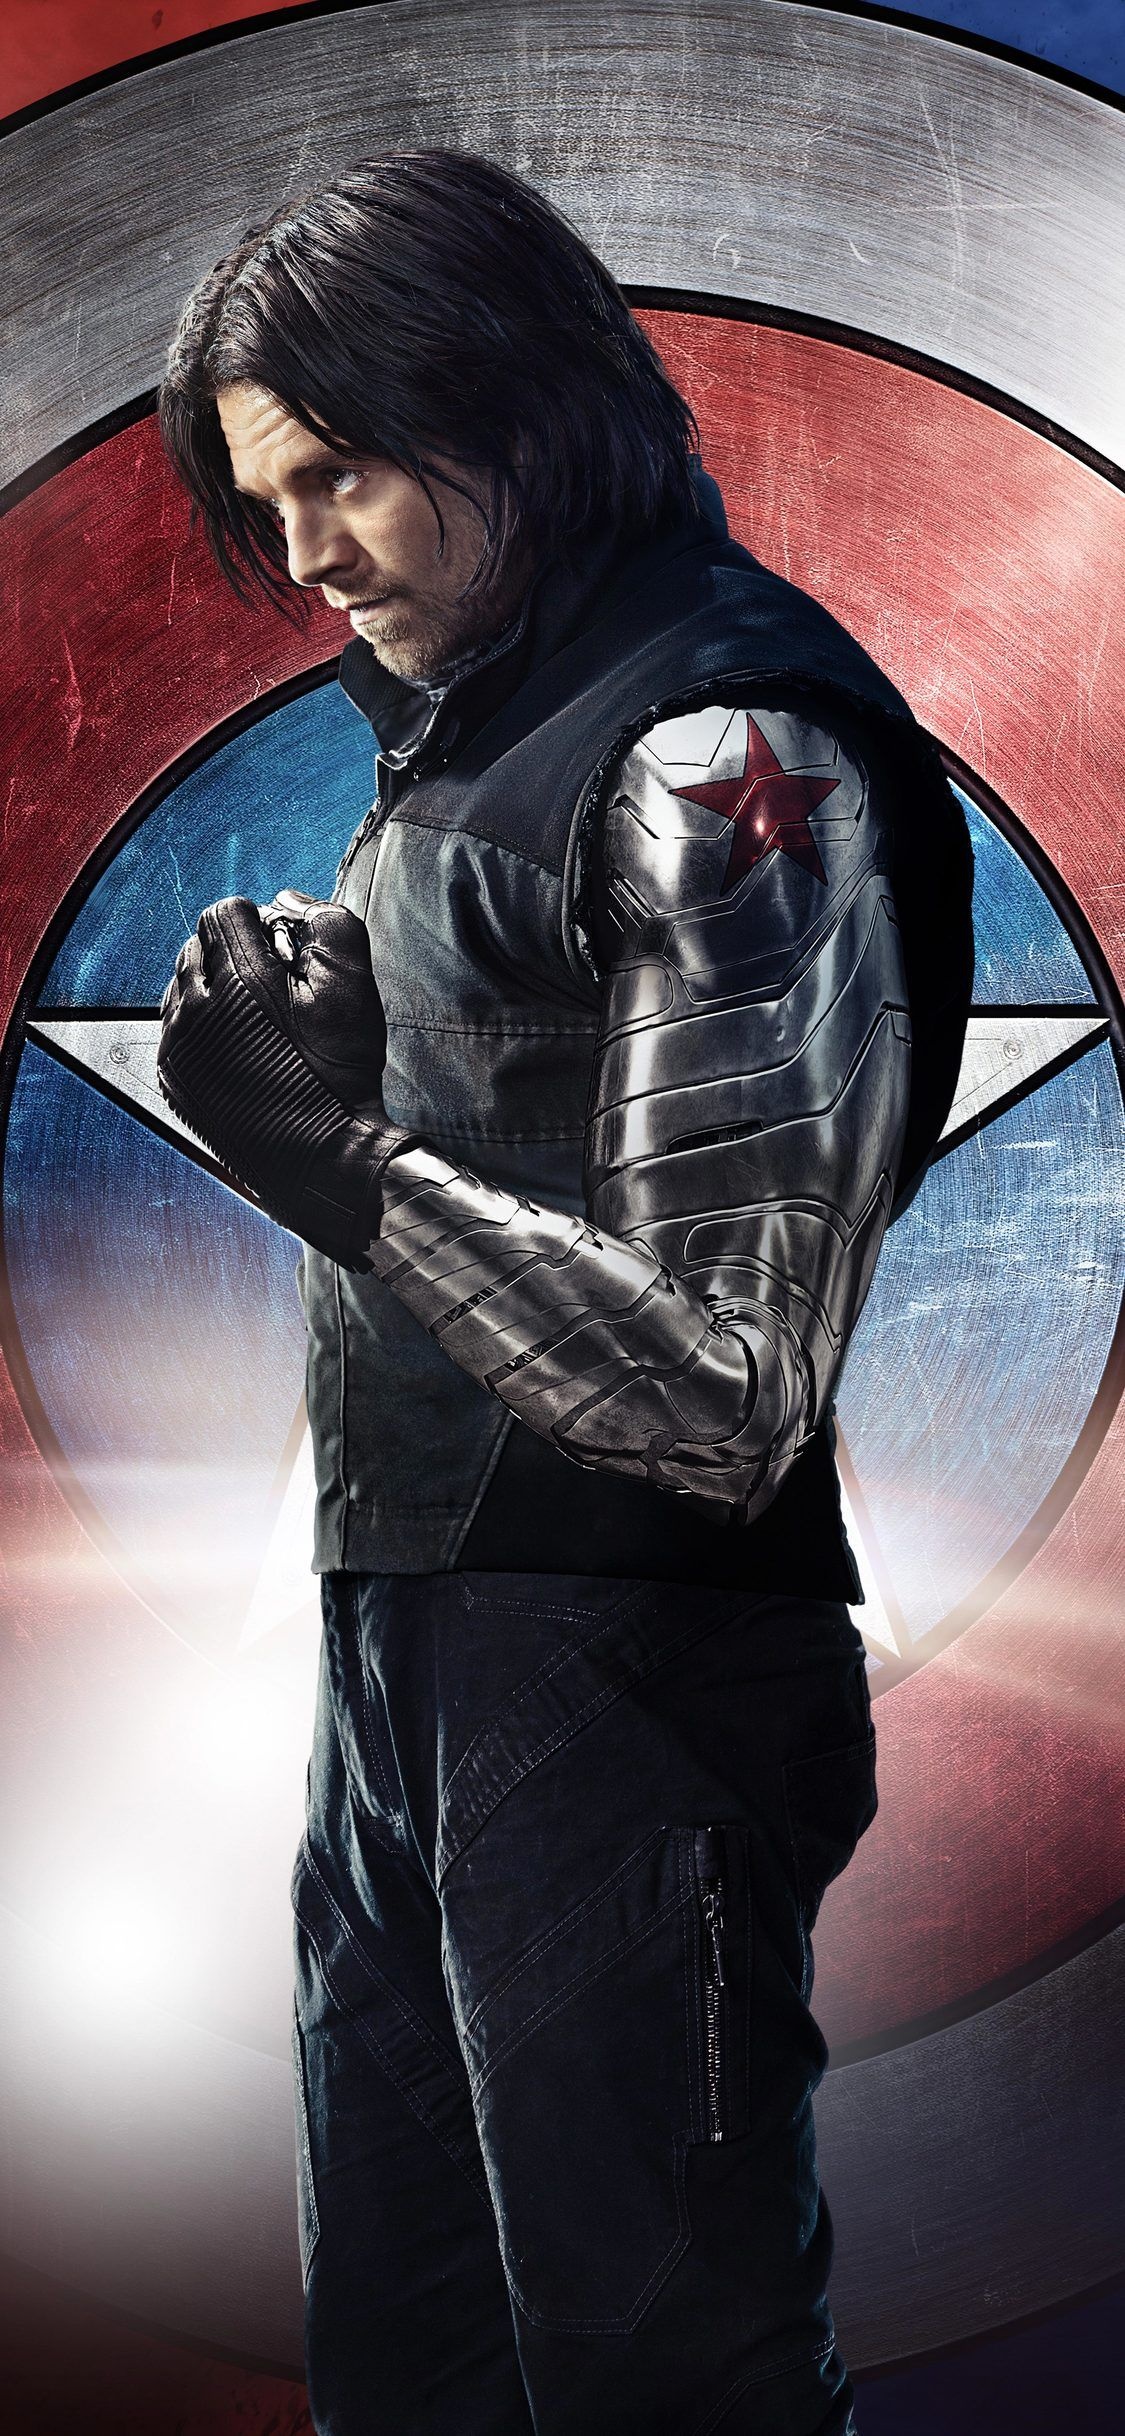 Winter Soldier, Bucky Barnes, HD 4K wallpapers, Movie images, 1130x2440 HD Phone